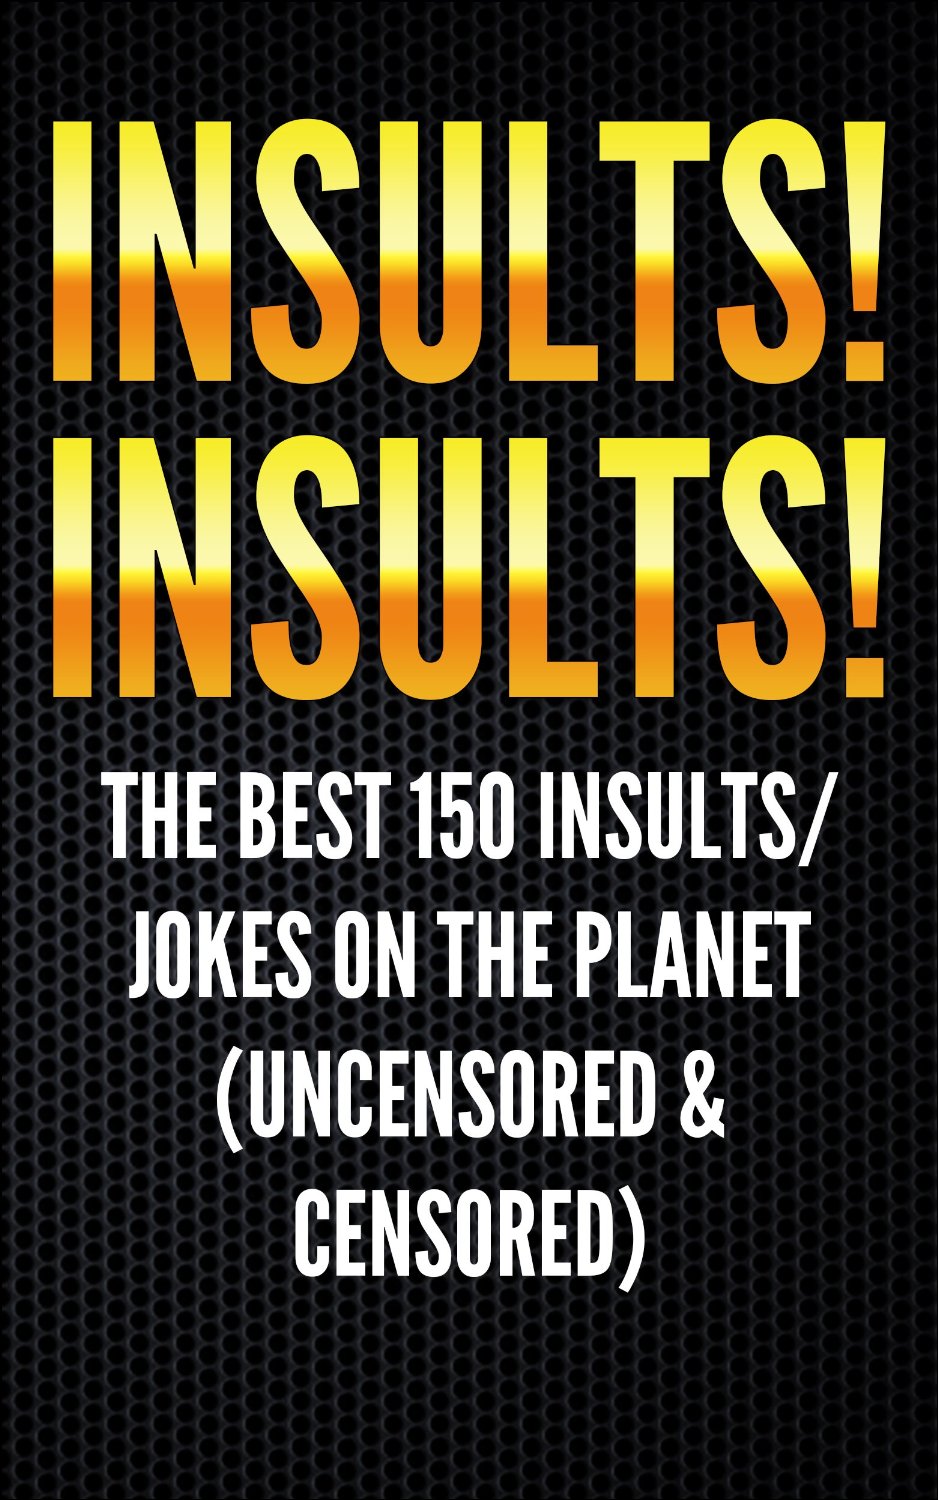 Insults! Insults! by The Moma Factory